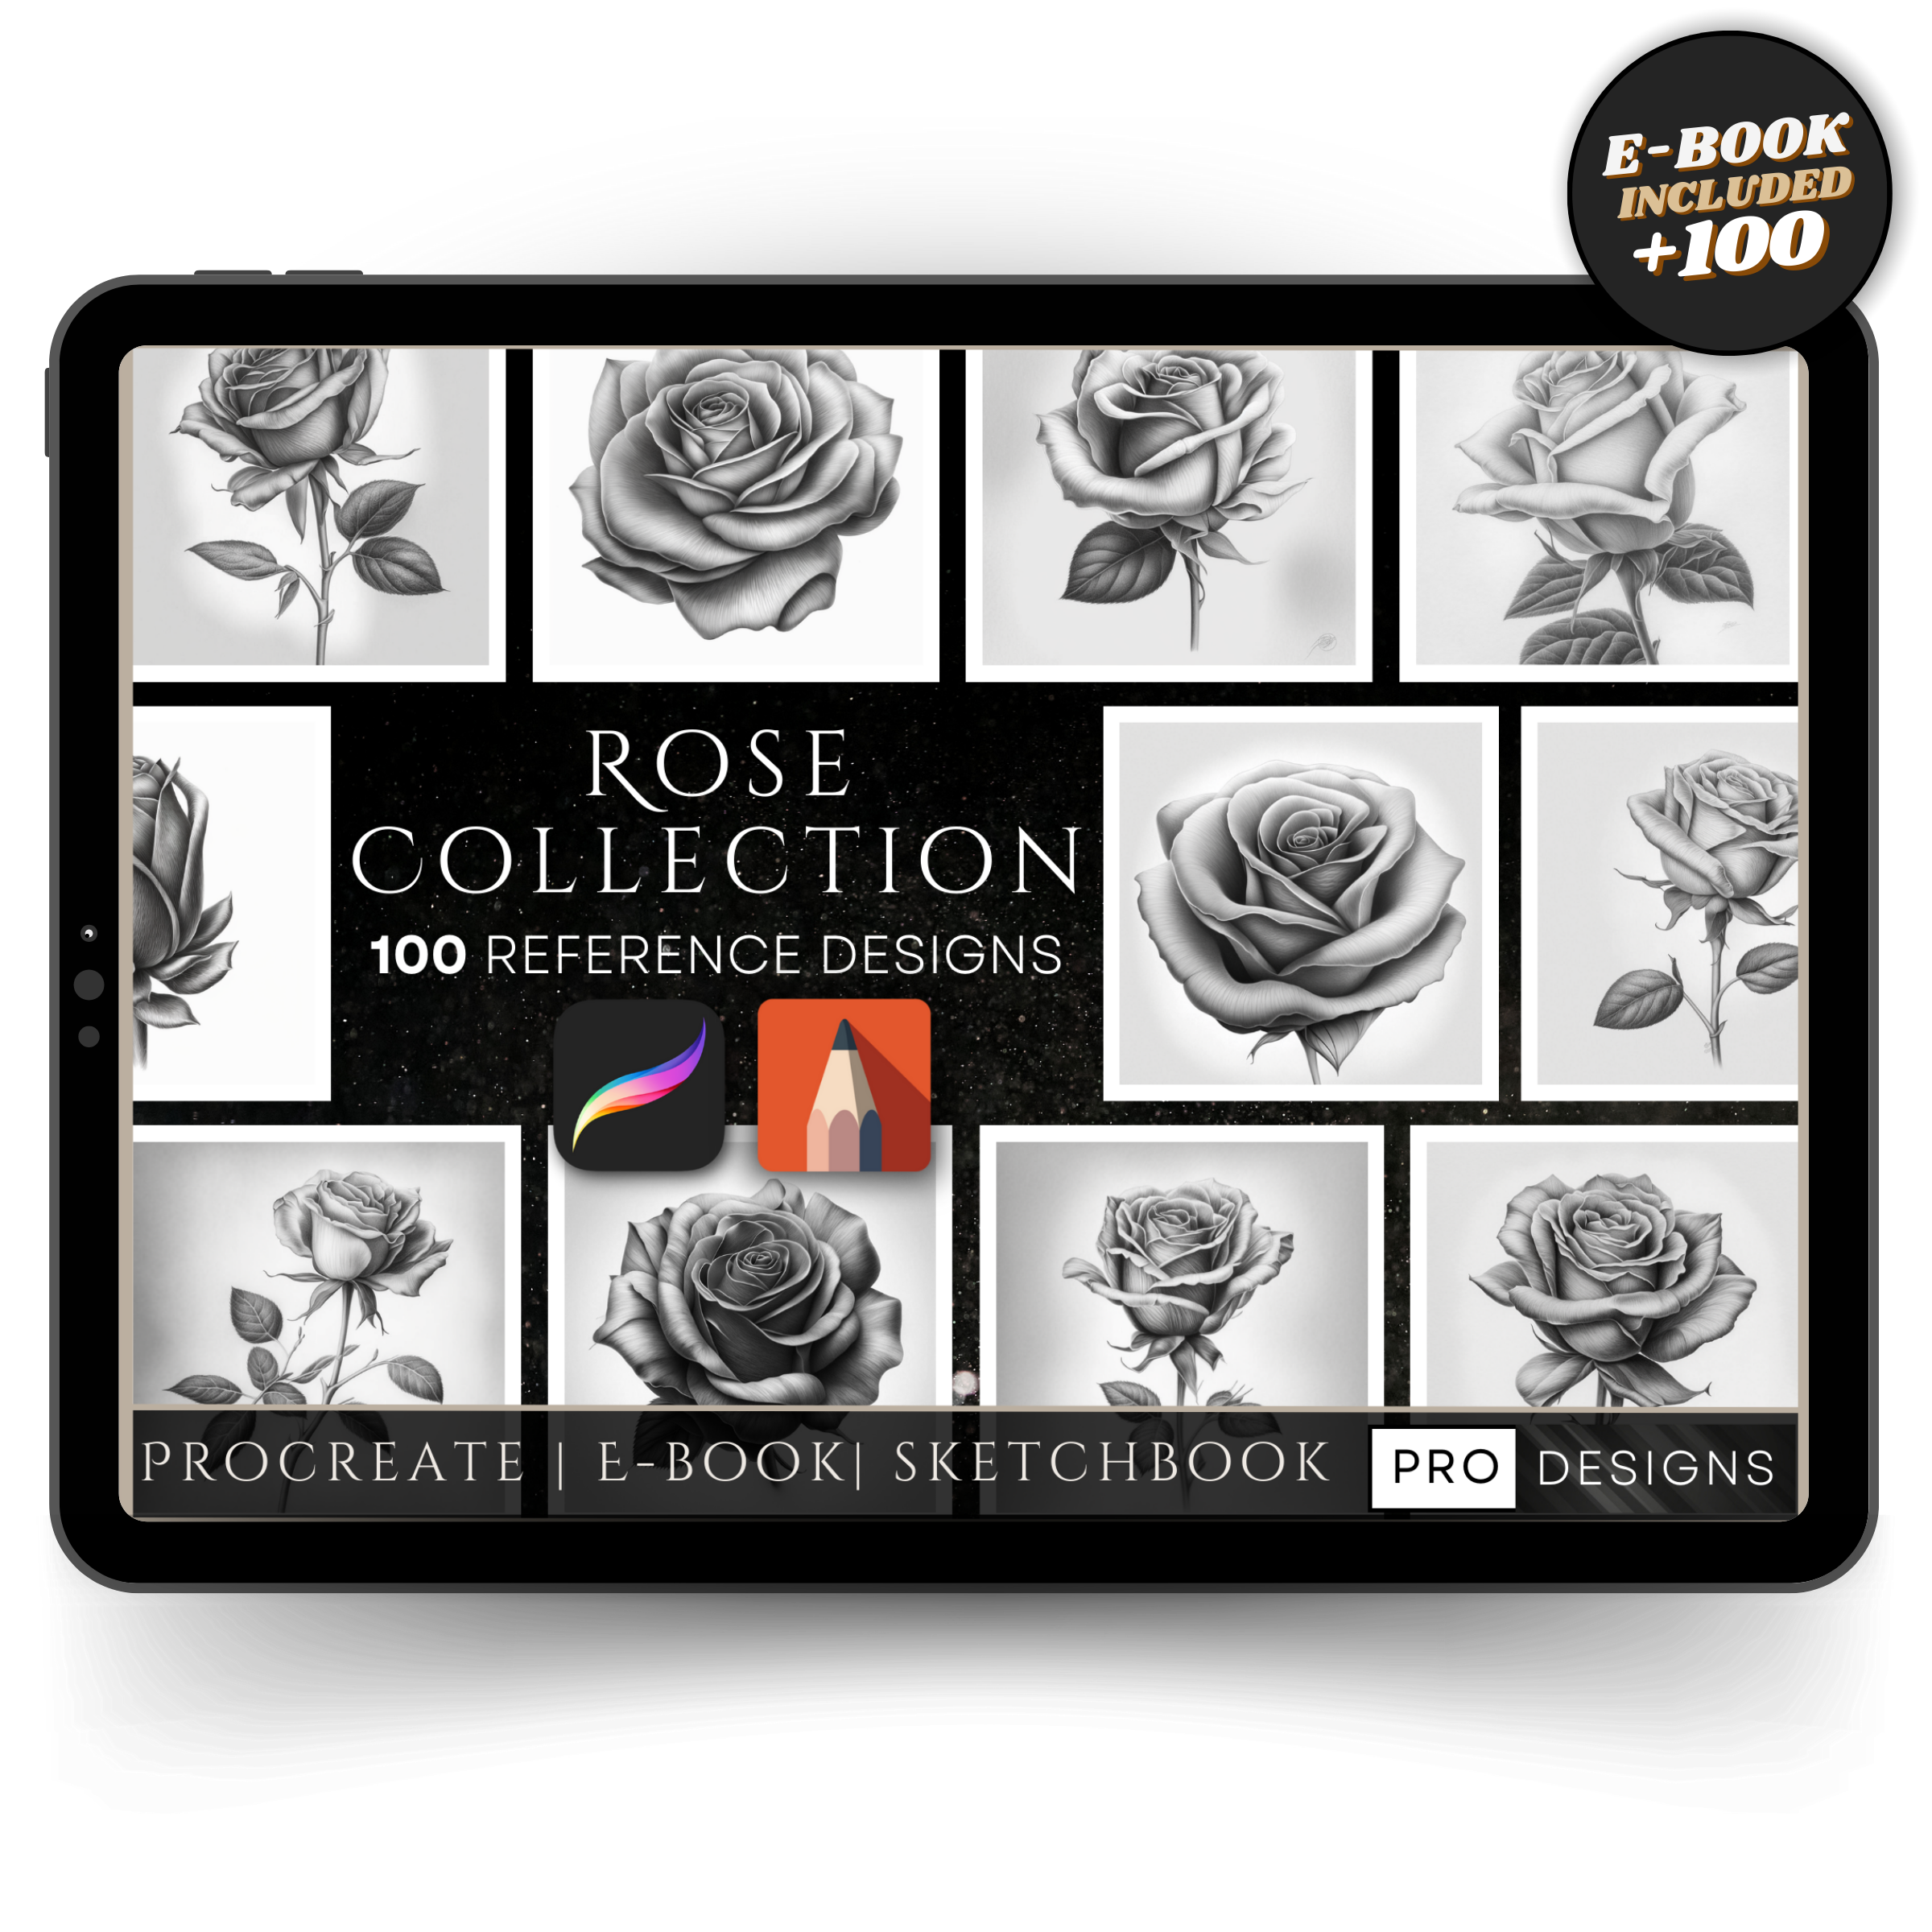 "Bloom of Elegance" - The Rose Collection